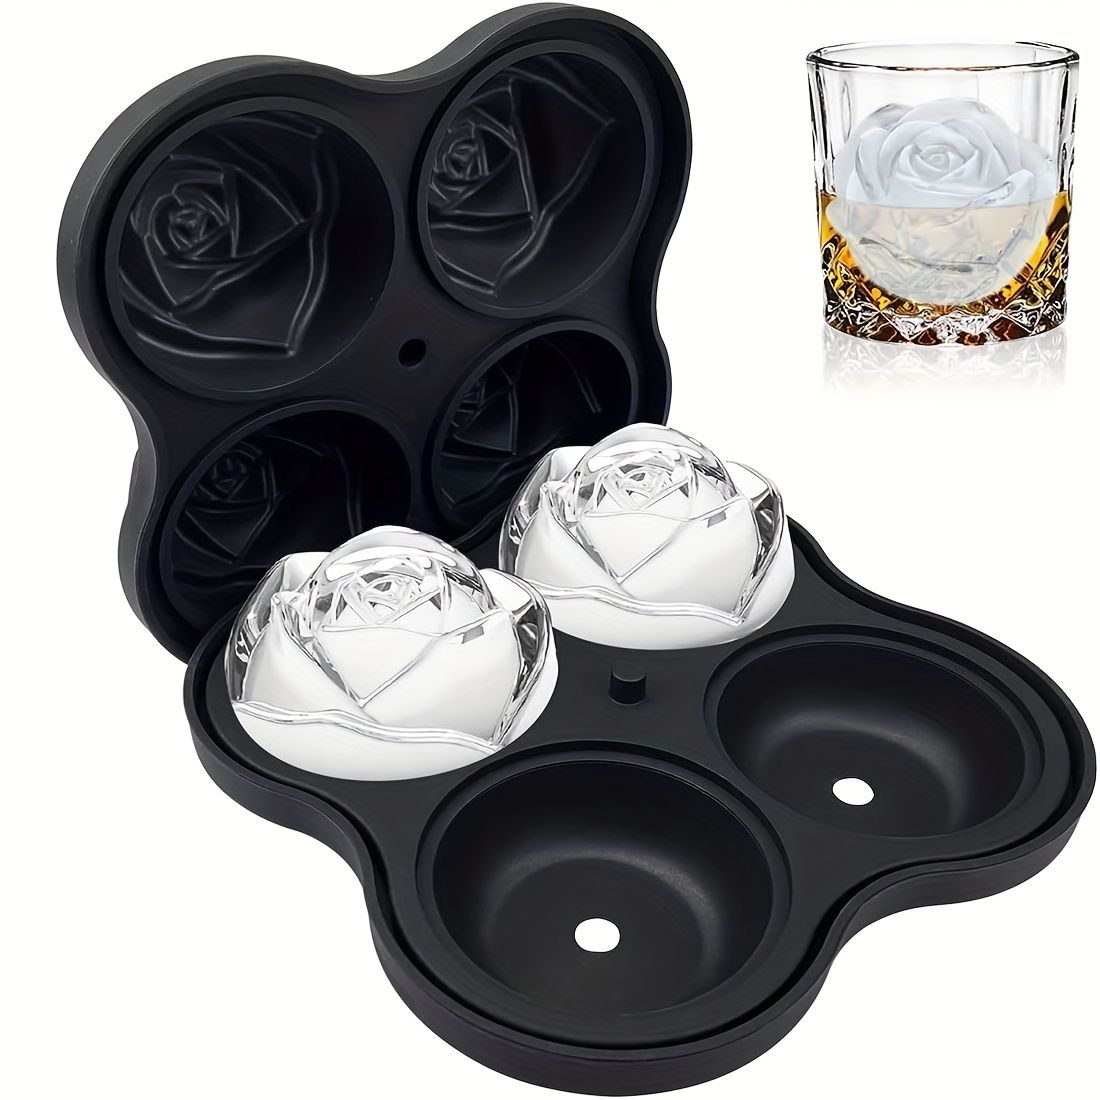 Fridja 3D Silicone Rose Shape Ice Cube Mold, Reusable Ice Jelly Rose Shape  Cube and Ice Cream Mold Tray Maker, for Chilled Drinks, Whiskey & Cocktails  